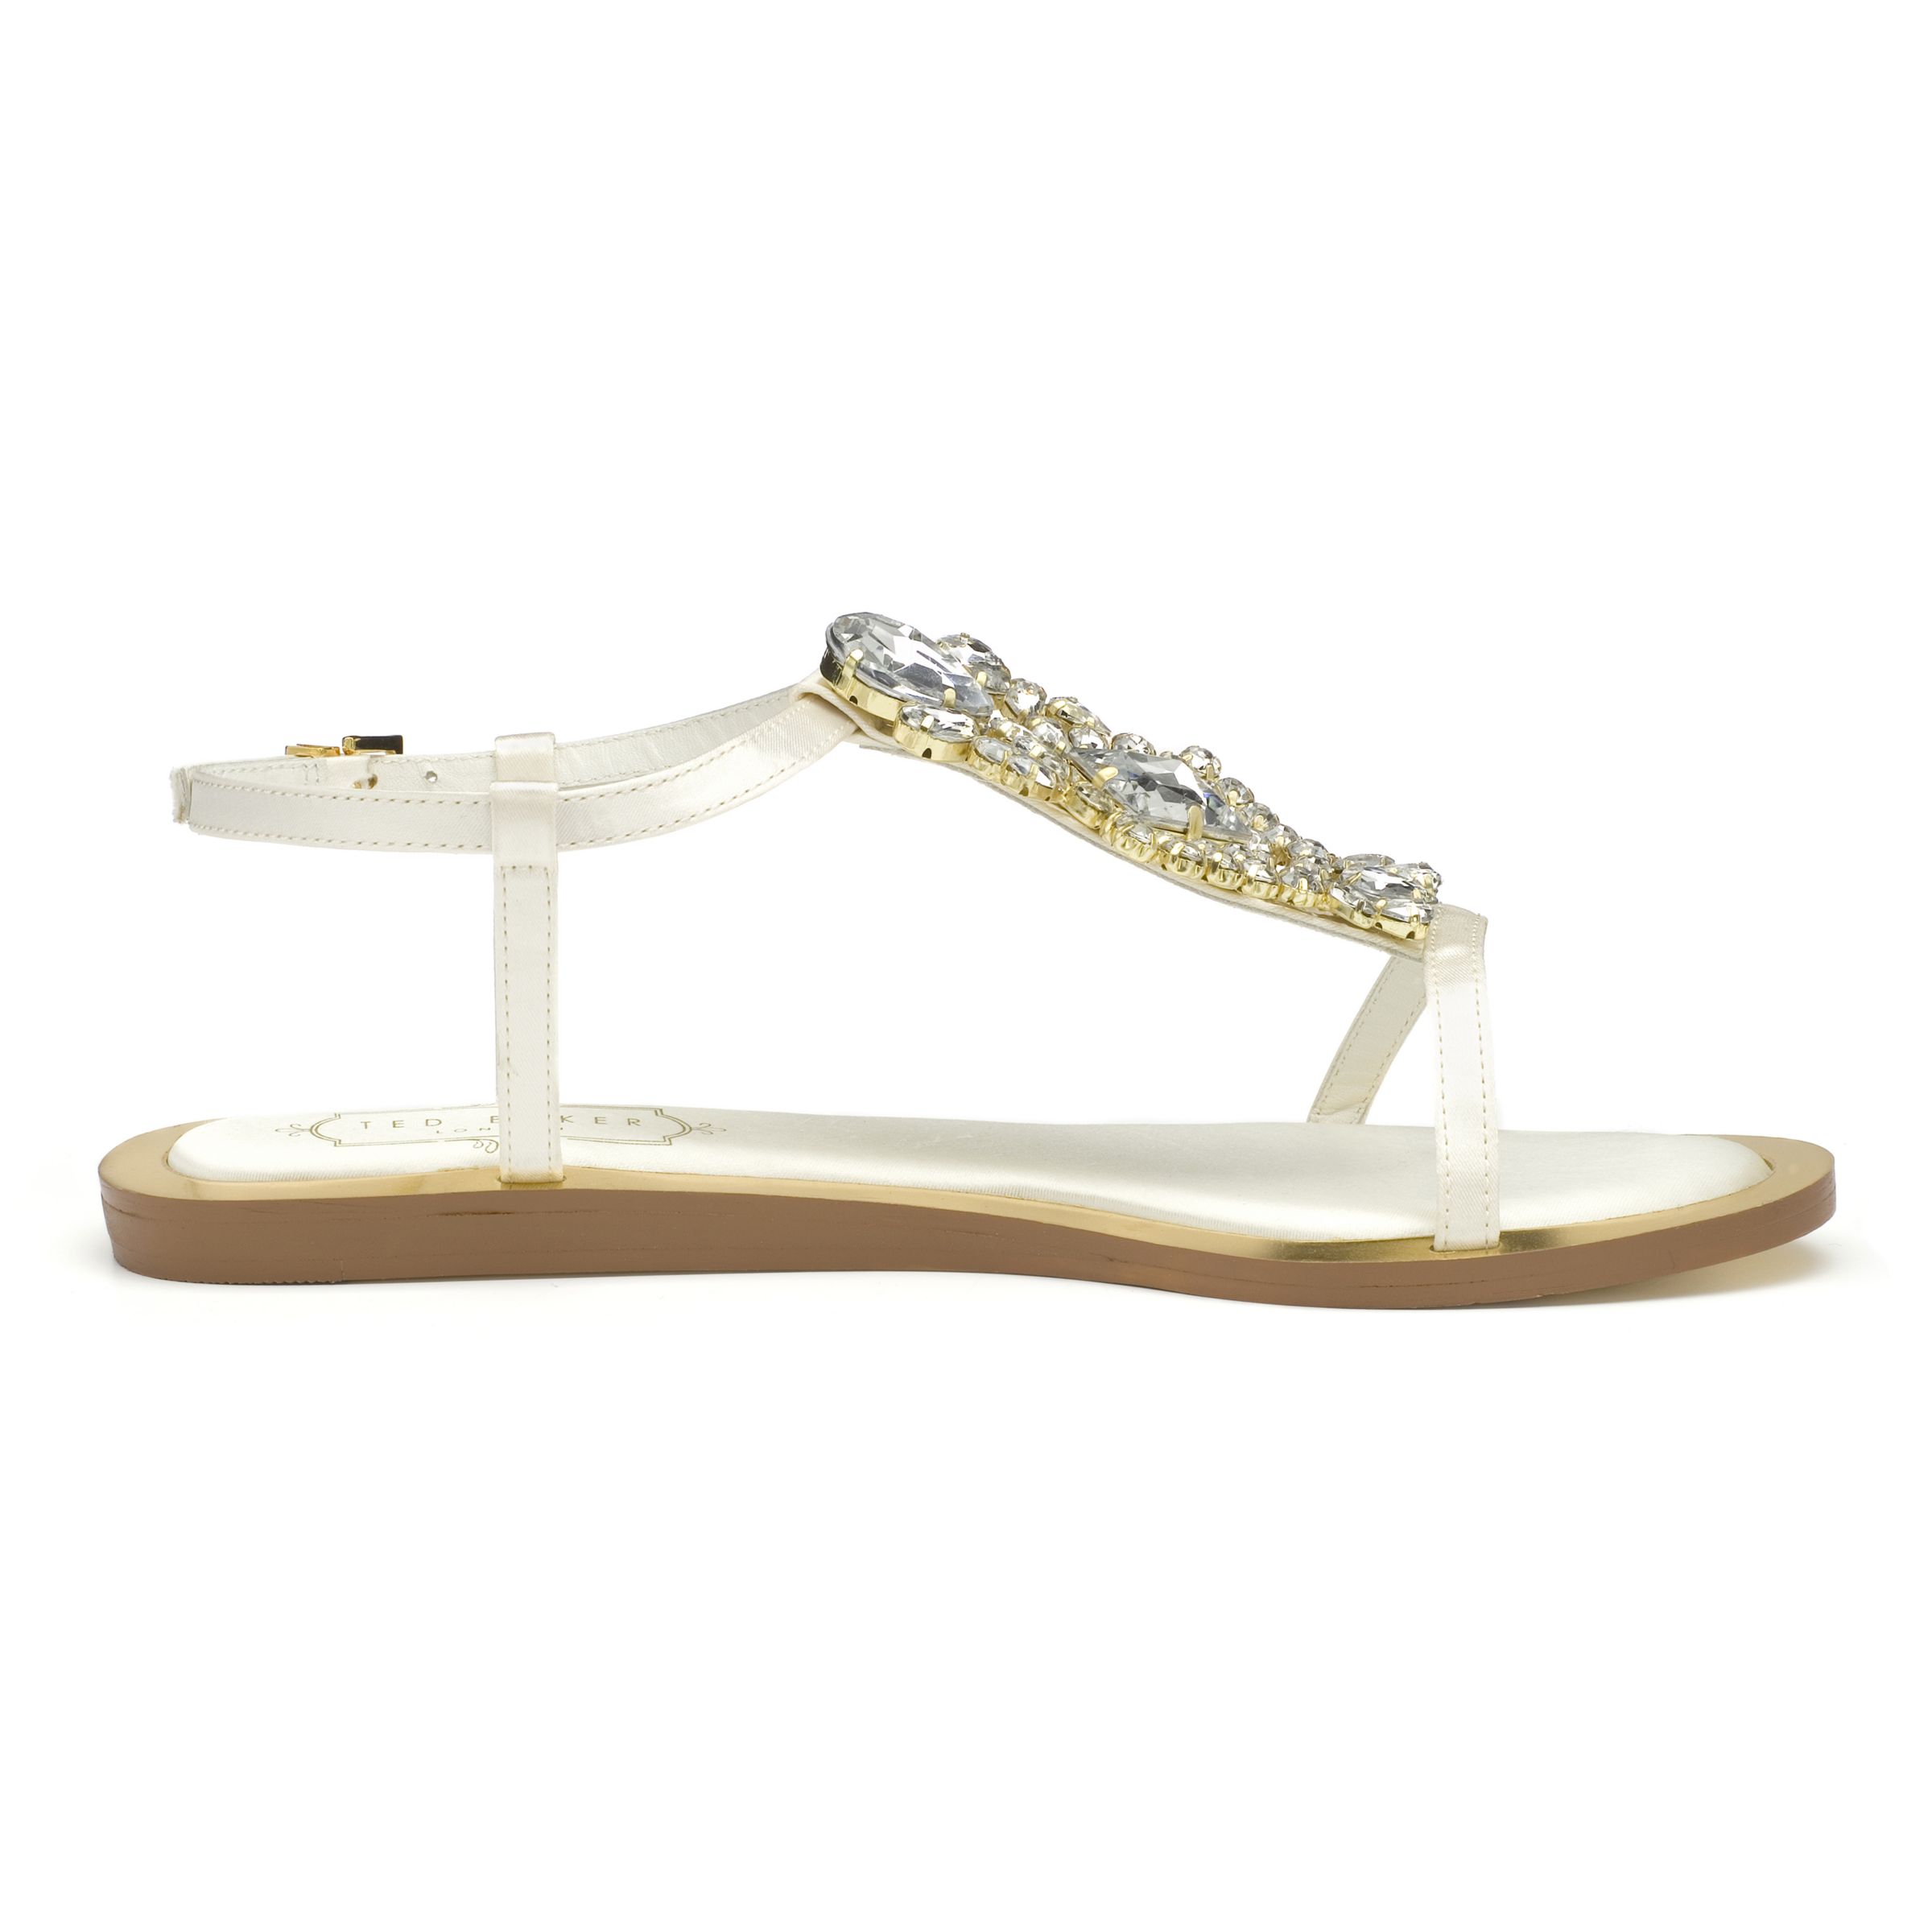 ... Tie the Knot Roseupe Jewelled Sandals, Cream Online at johnlewis